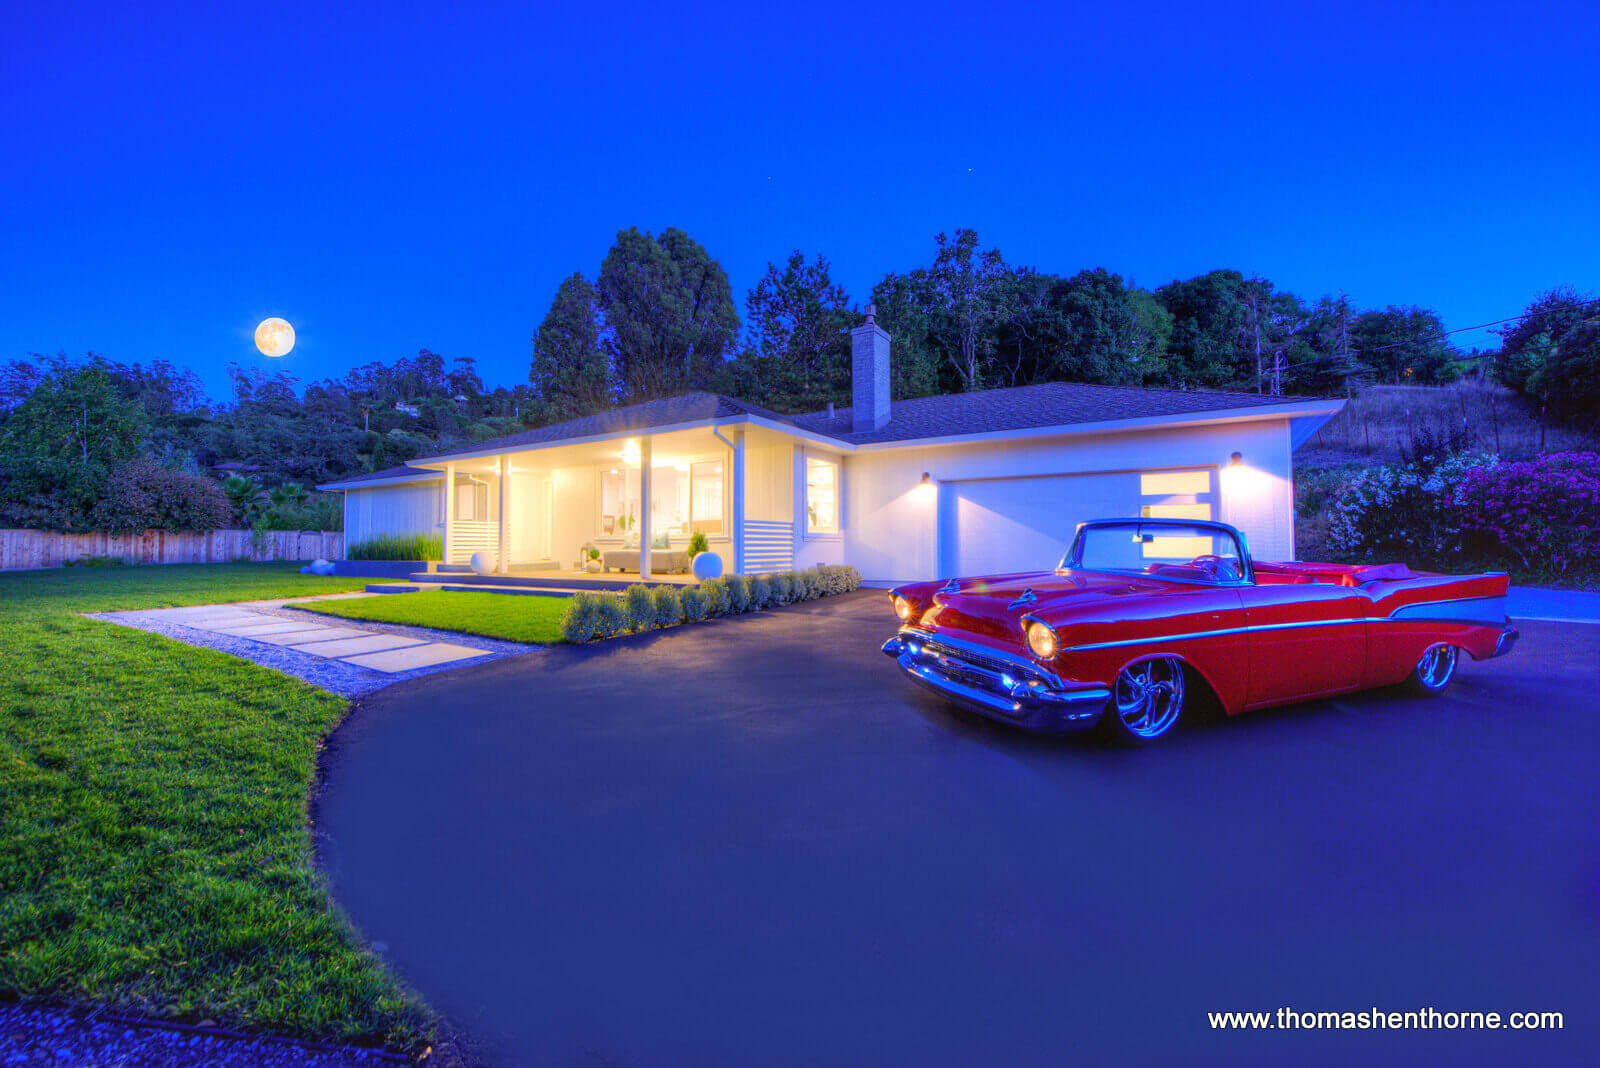 Front driveway of 65 Los Ranchitos Road San Rafael and 57 Chevy with Full Moon